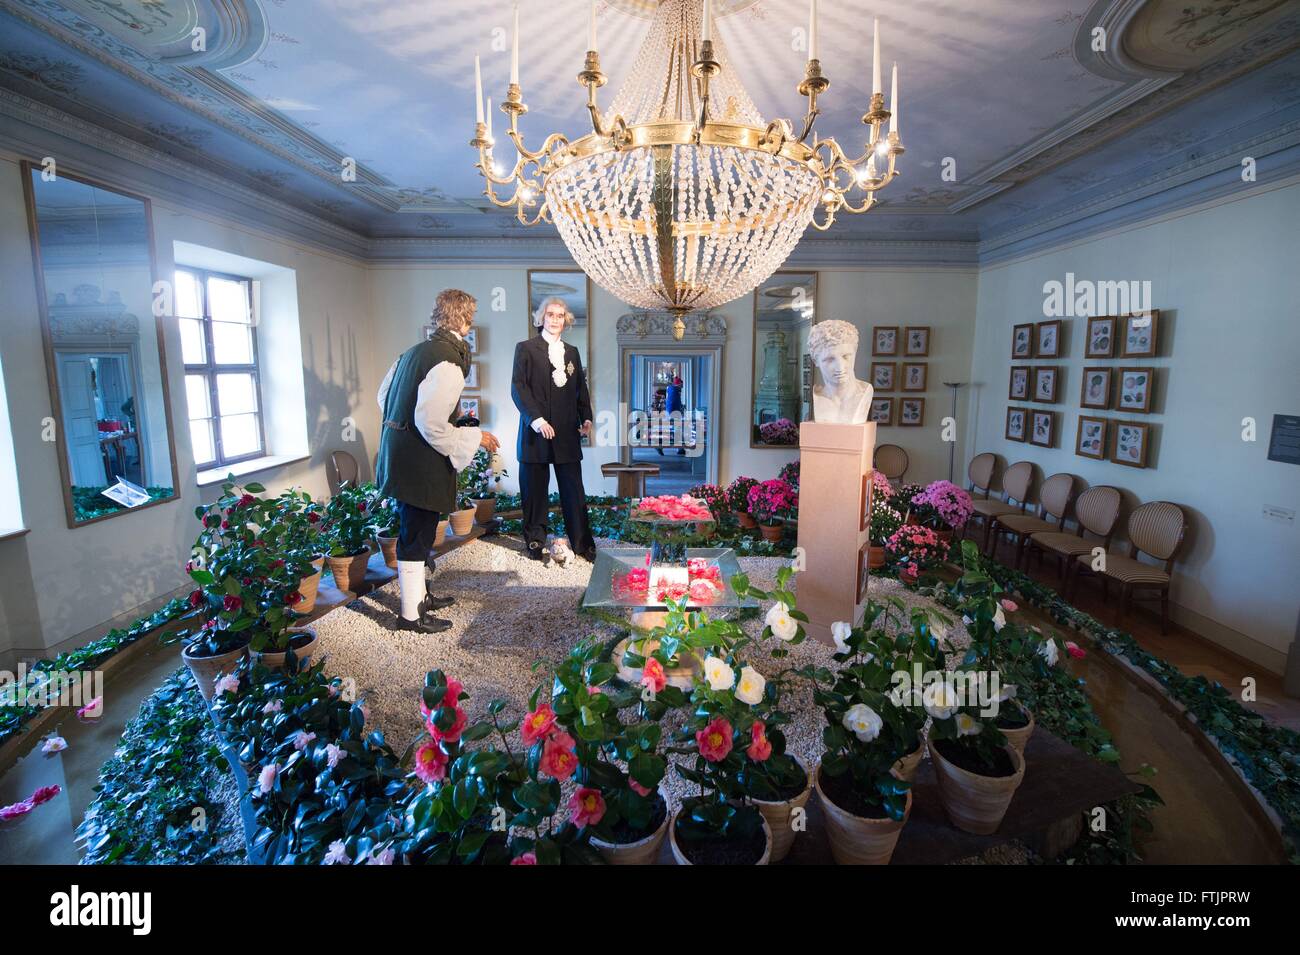 Pirna, Germany. 04th Mar, 2016. Figures of camellia grower Jacob Friedrich Seidel (L) and Duke Carl August of Saxe-Weimar-Eisenach are on display during the German camellia blossoms expo at Zuschendorf countryside castle in Pirna, Germany, 04 March 2016. The German camellia blossoms expo was held at this location from 05 to 13 March. Photo: SEBASTIAN KAHNERT/dpa/Alamy Live News Stock Photo